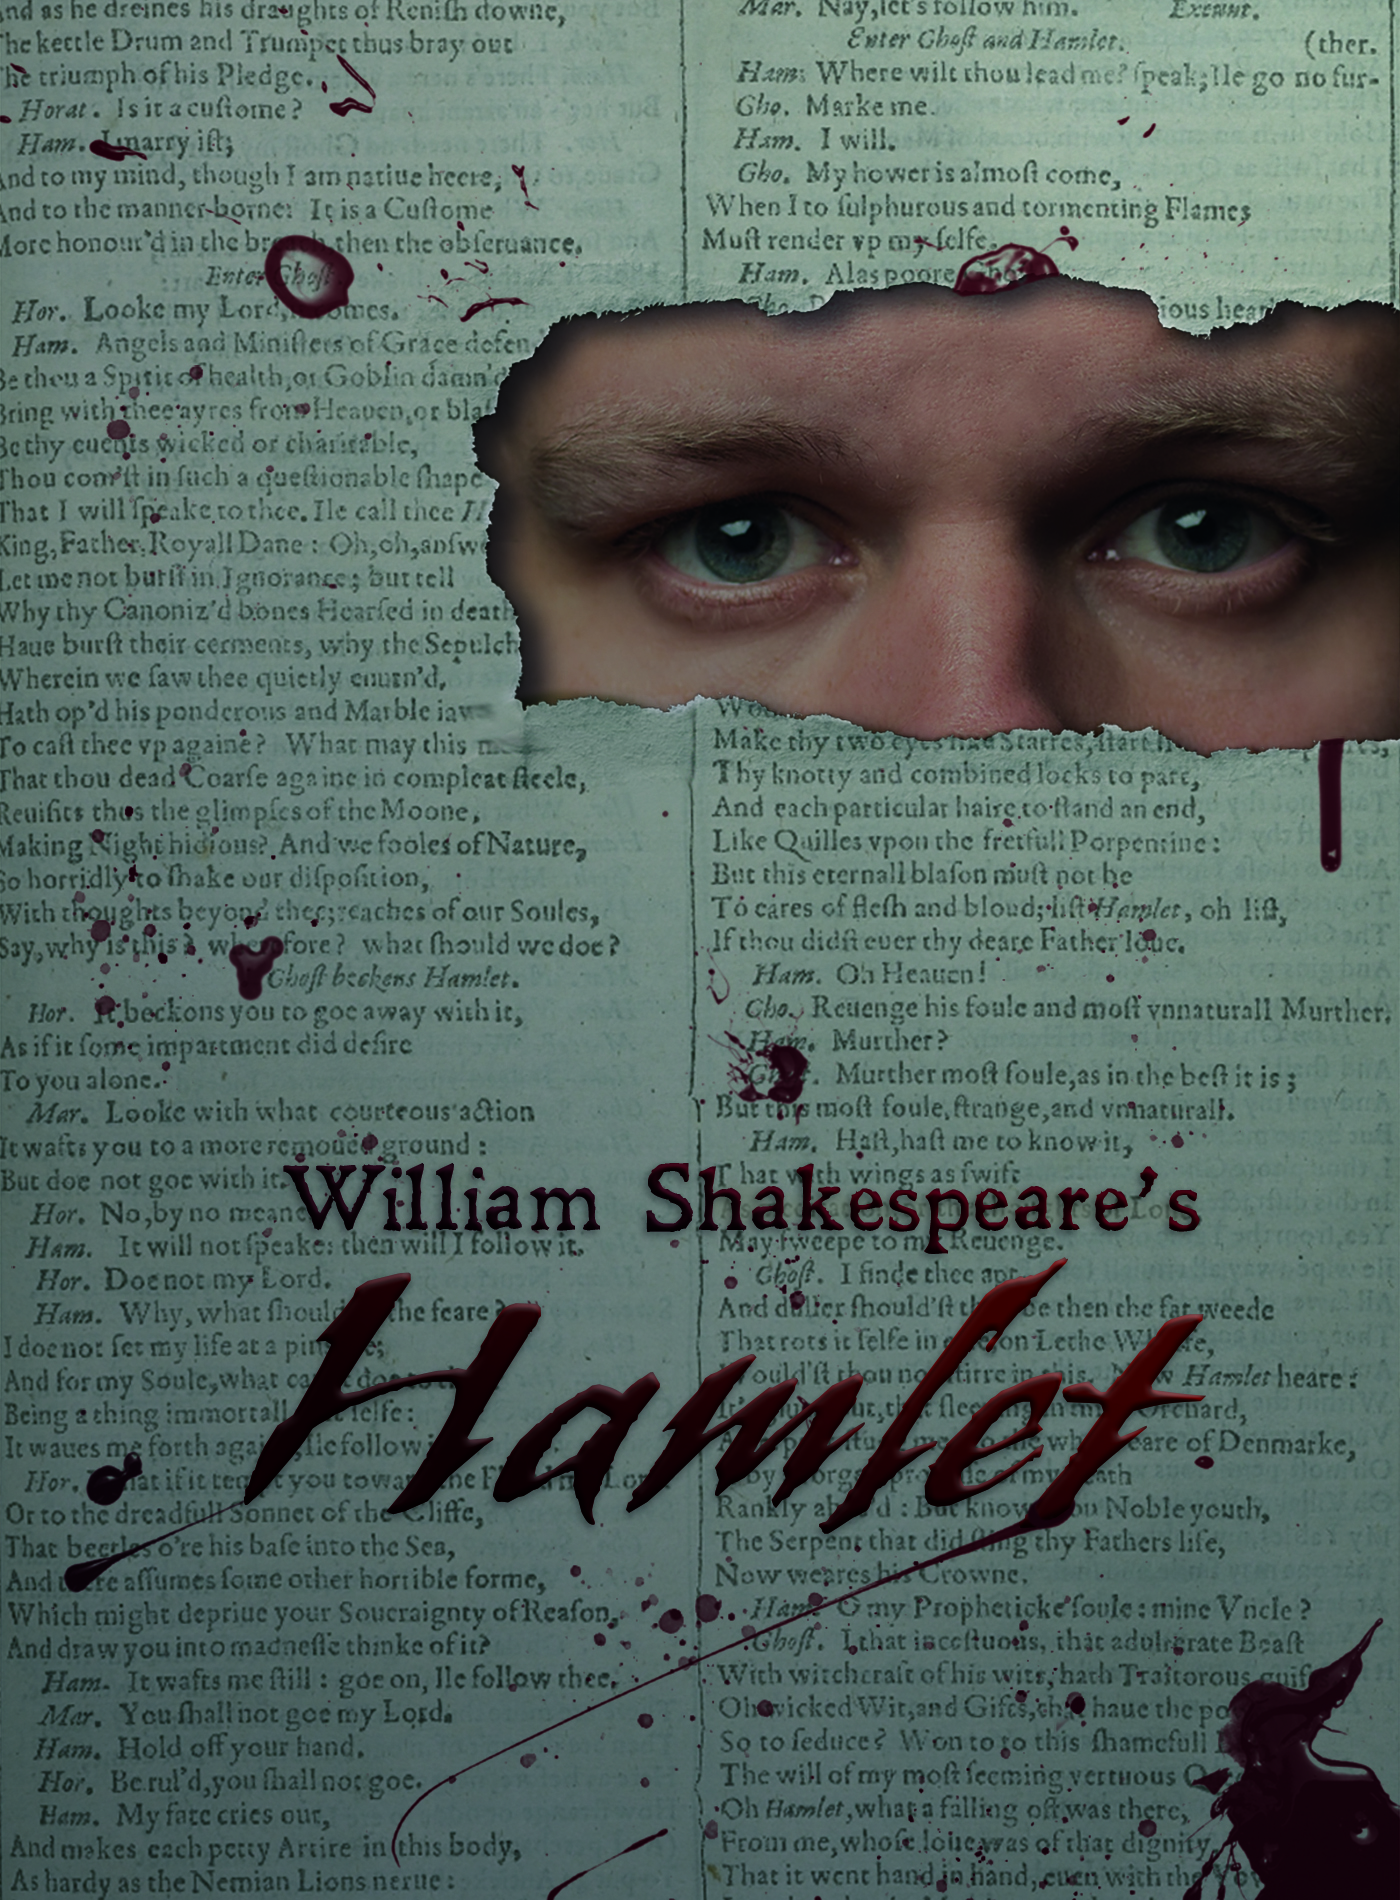 Hamlet Book Cover of bloody play page and man looking through